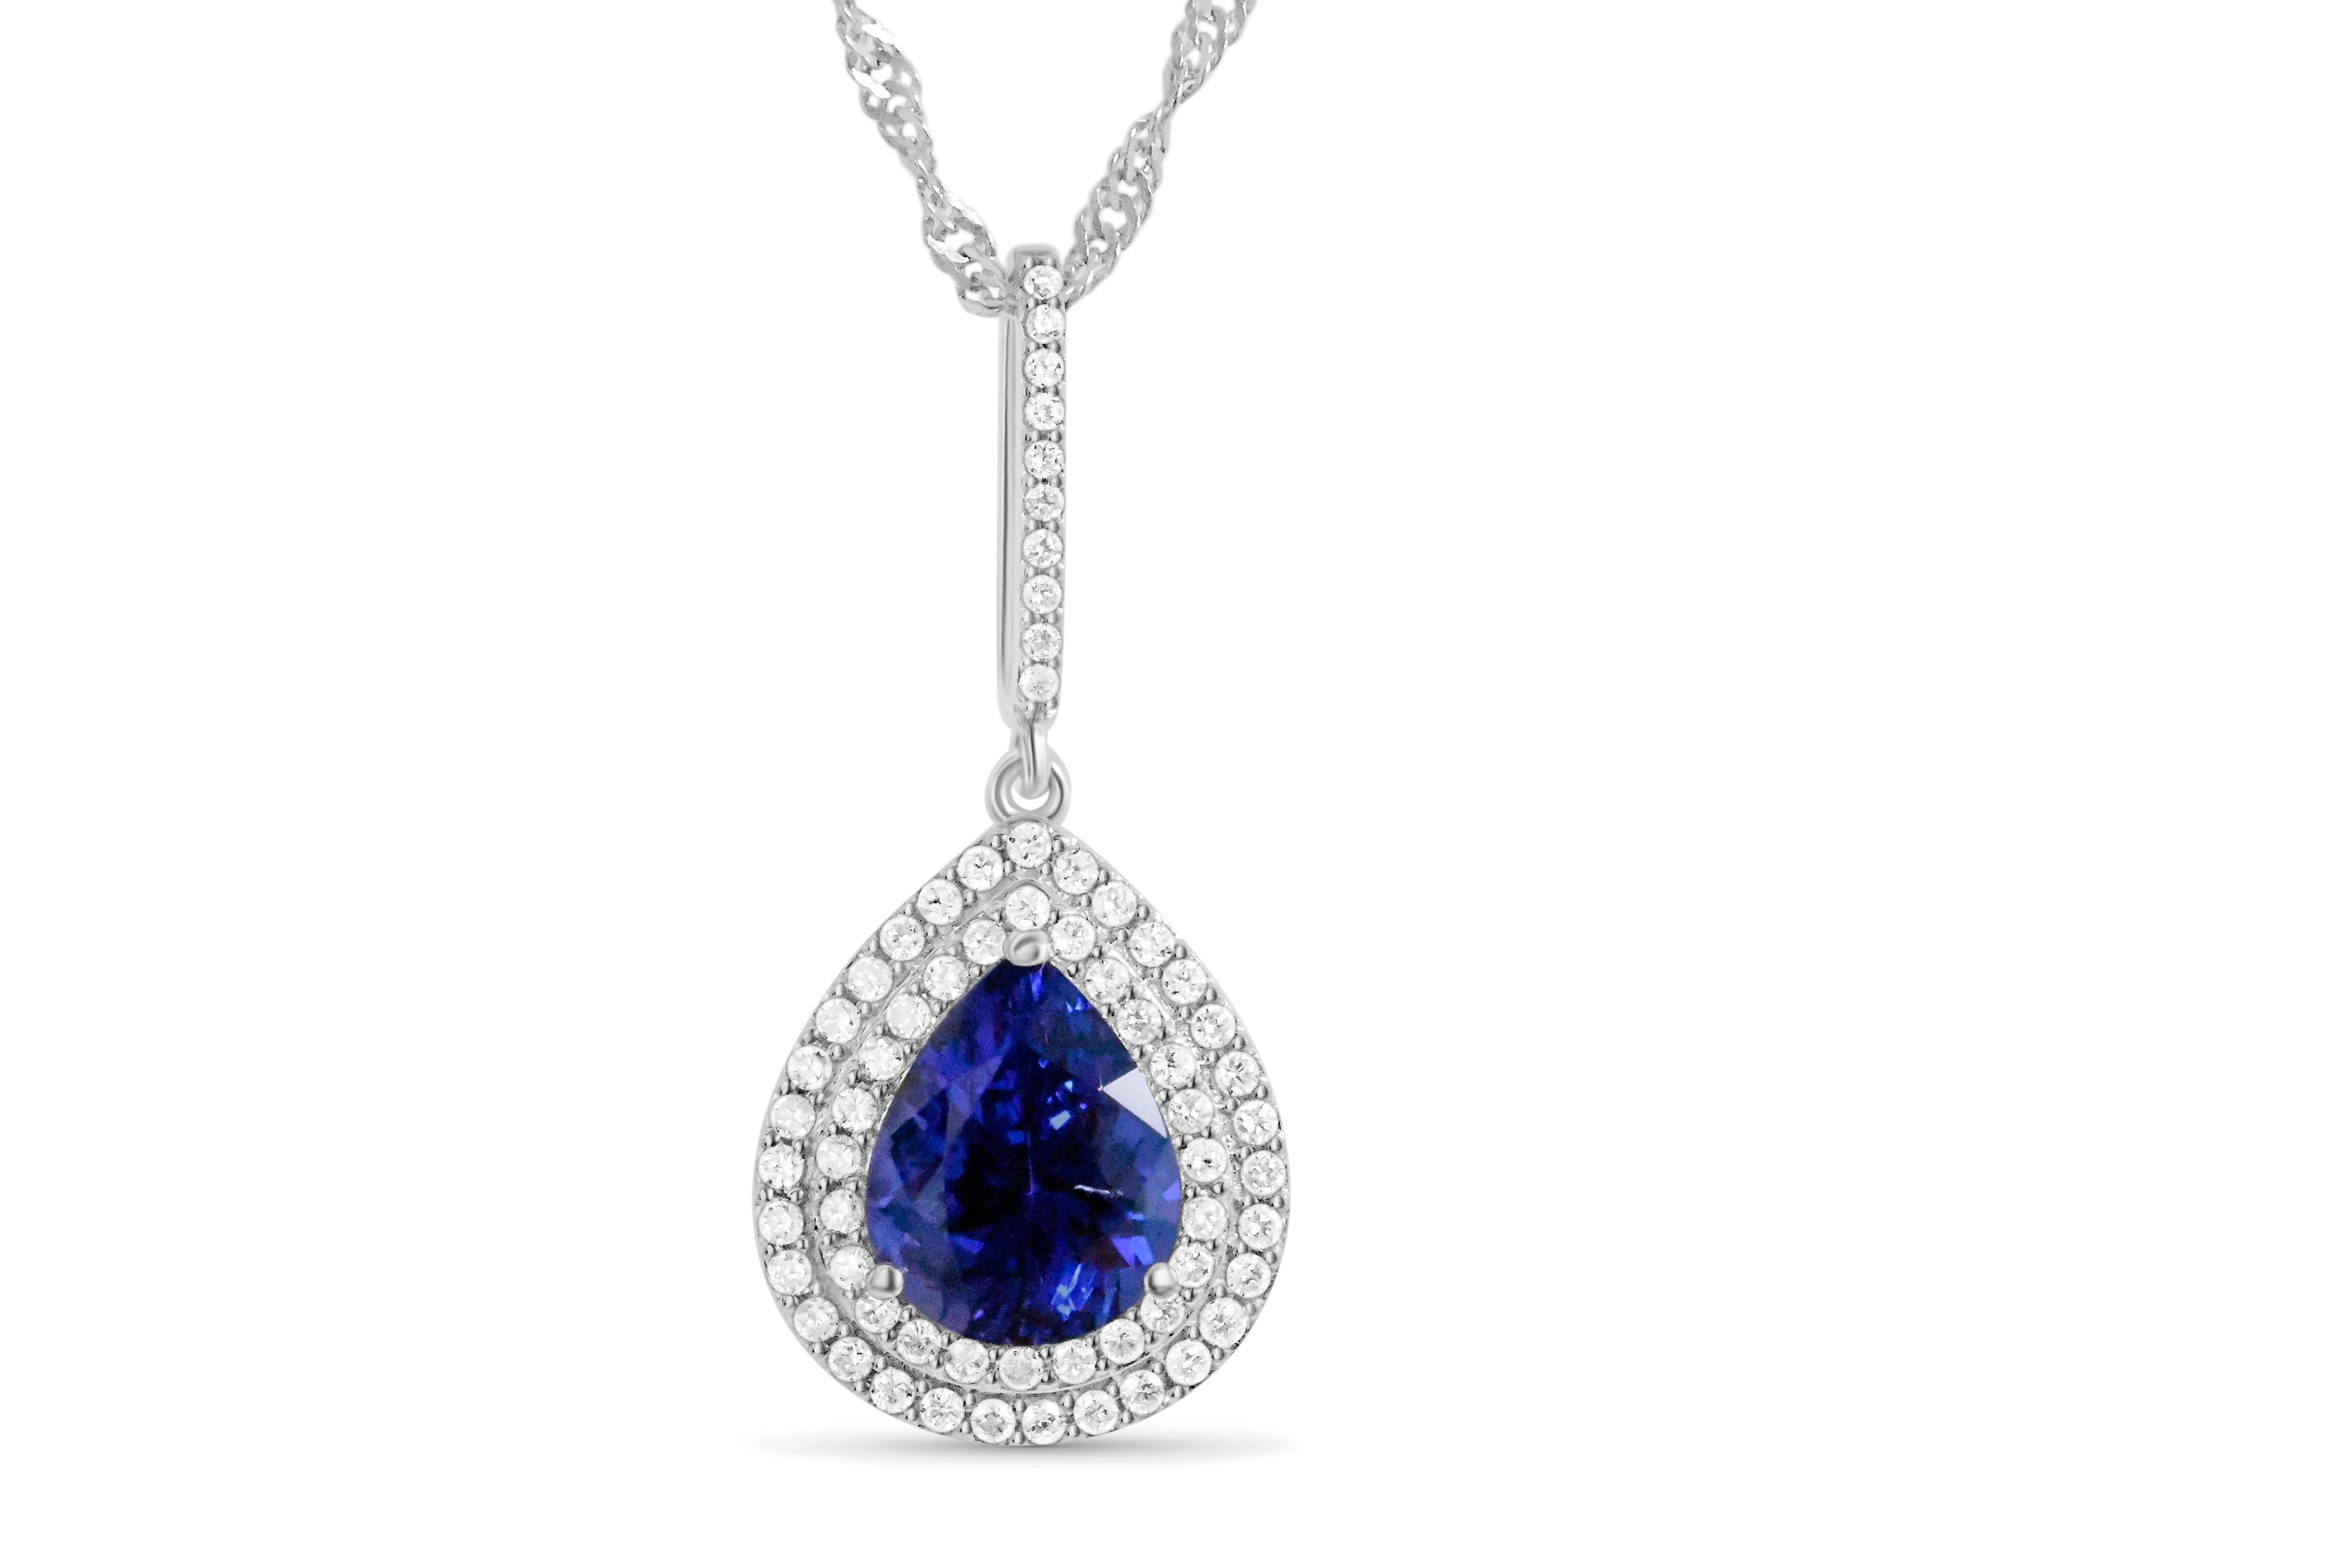 Welcome to Blue Star Gems NY LLC! Discover popular engagement Necklace & Wedding Necklace All designs from classic to vintage inspired. We offer Joyful jewelry for everyday wear. Just for you. We go above and beyond the current industry standards to